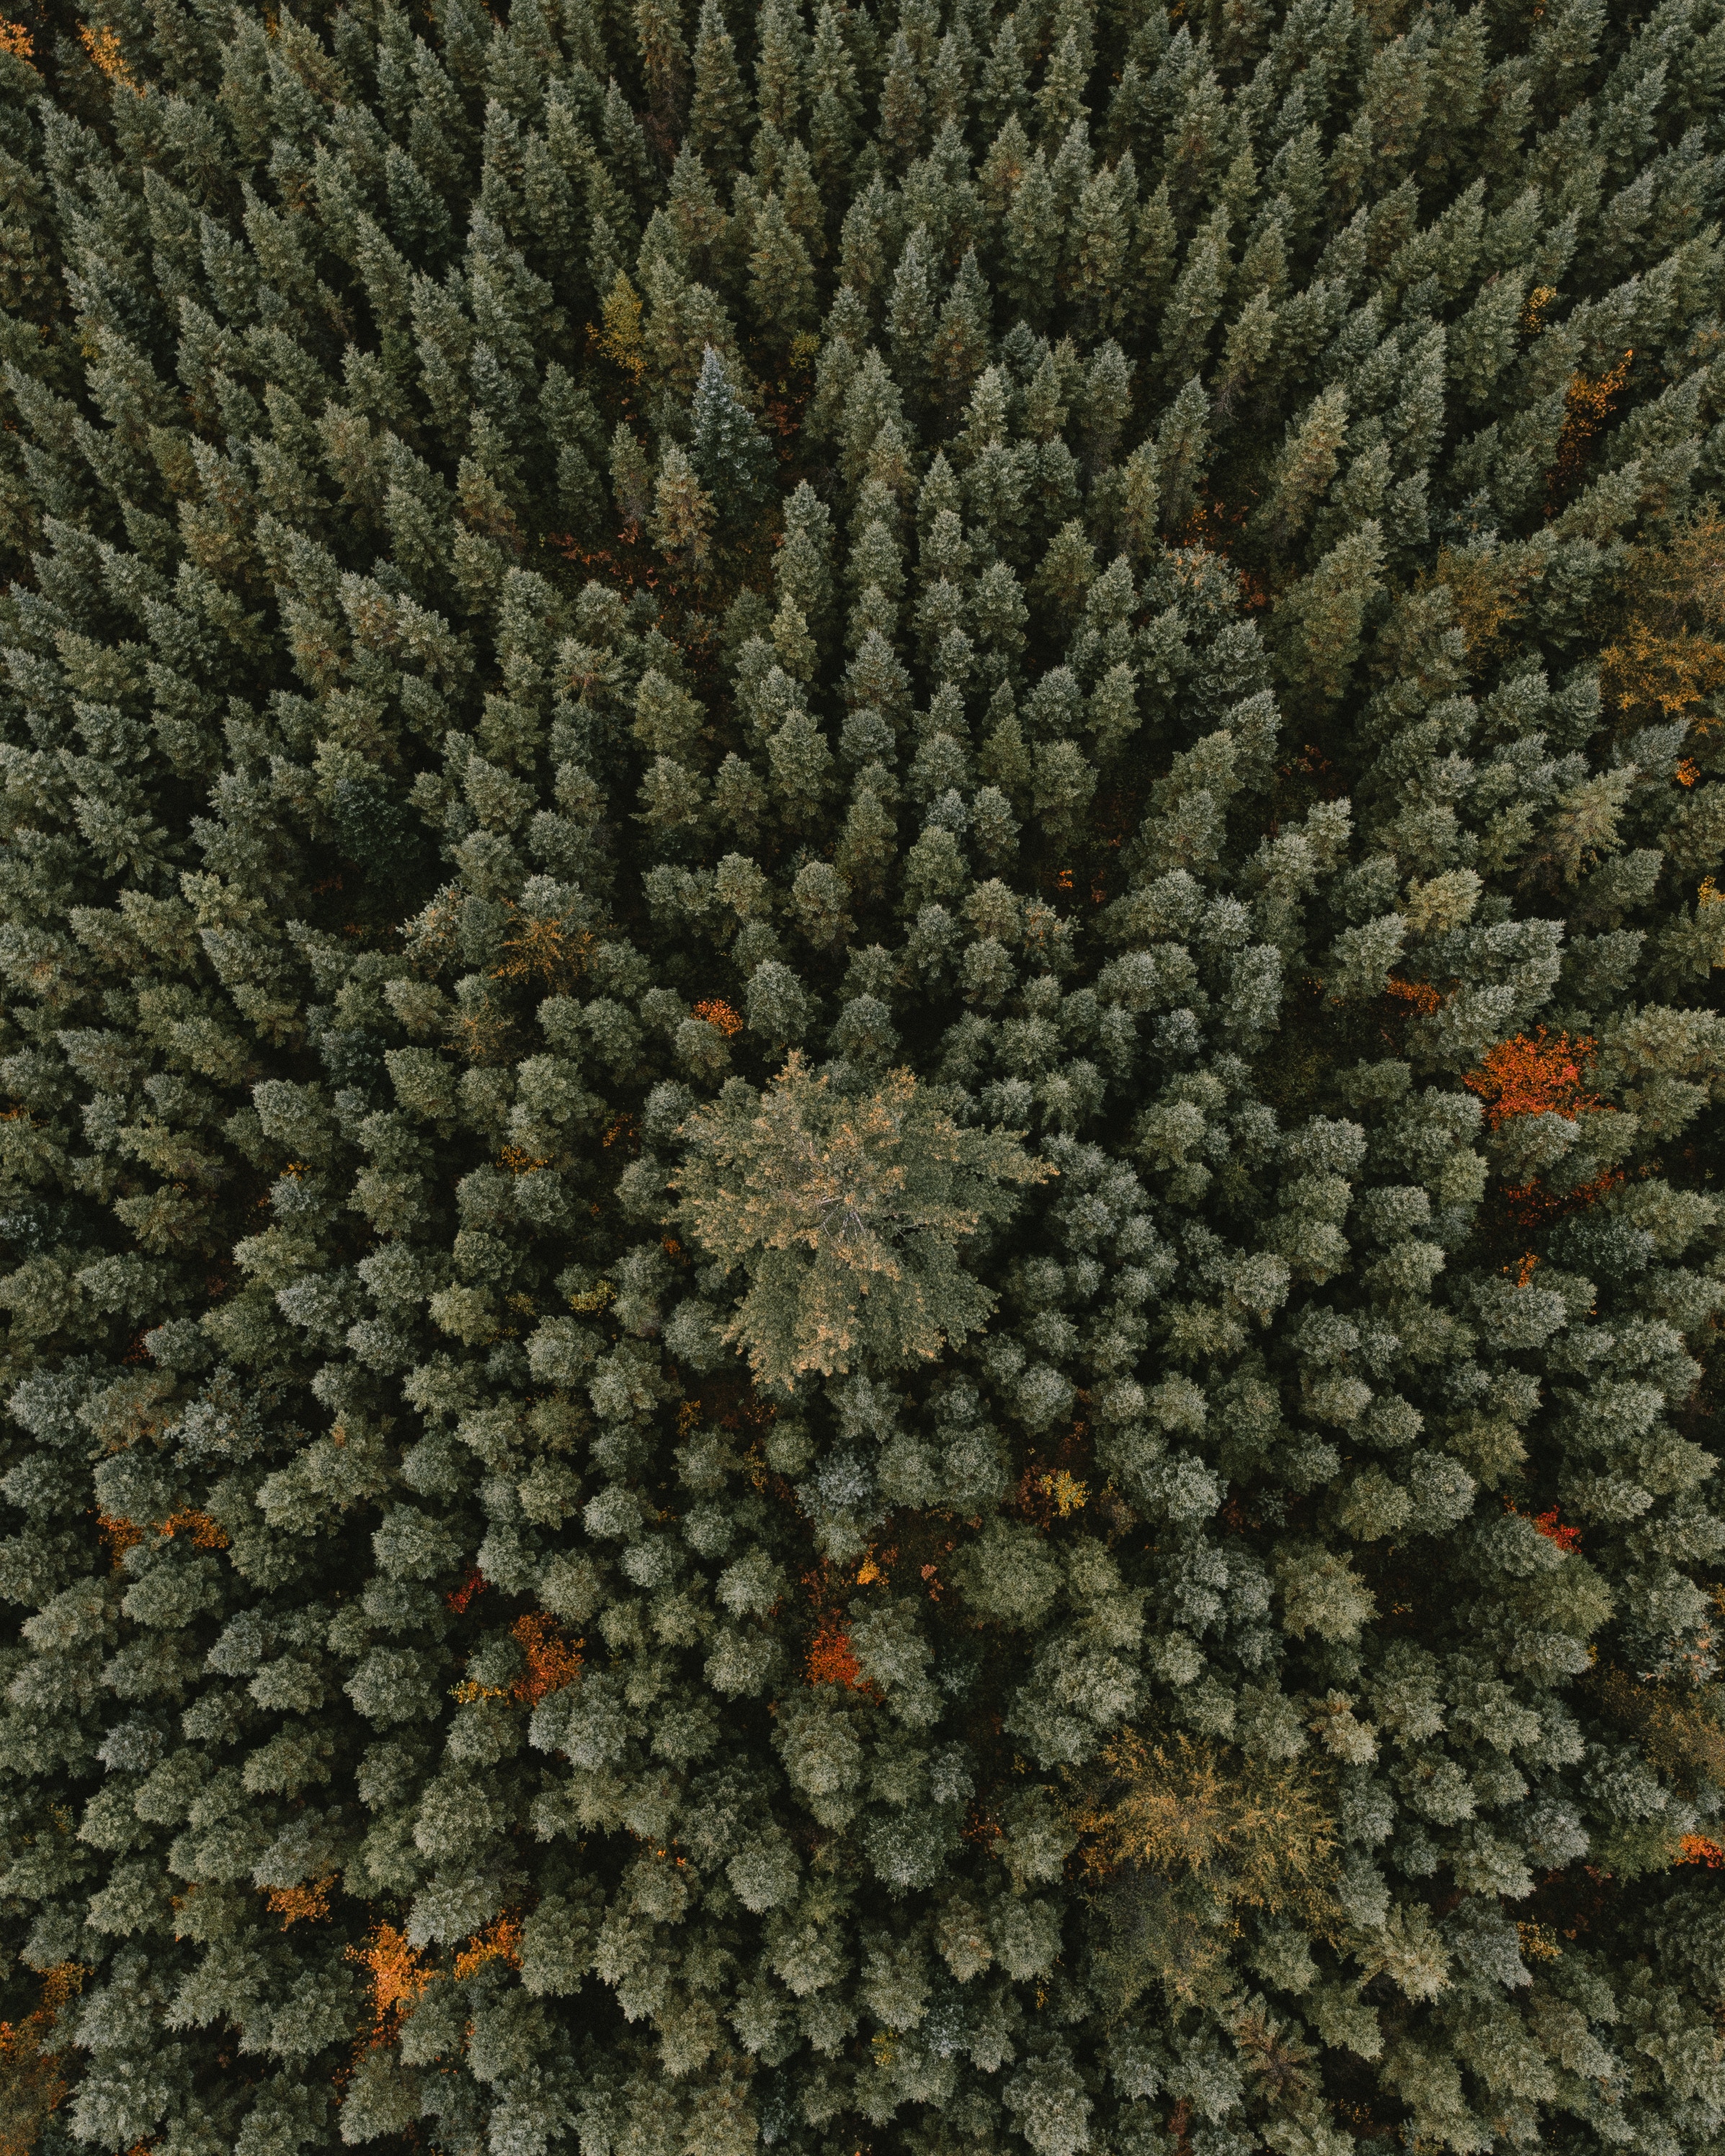 Download background nature, trees, green, view from above, forest, ornament